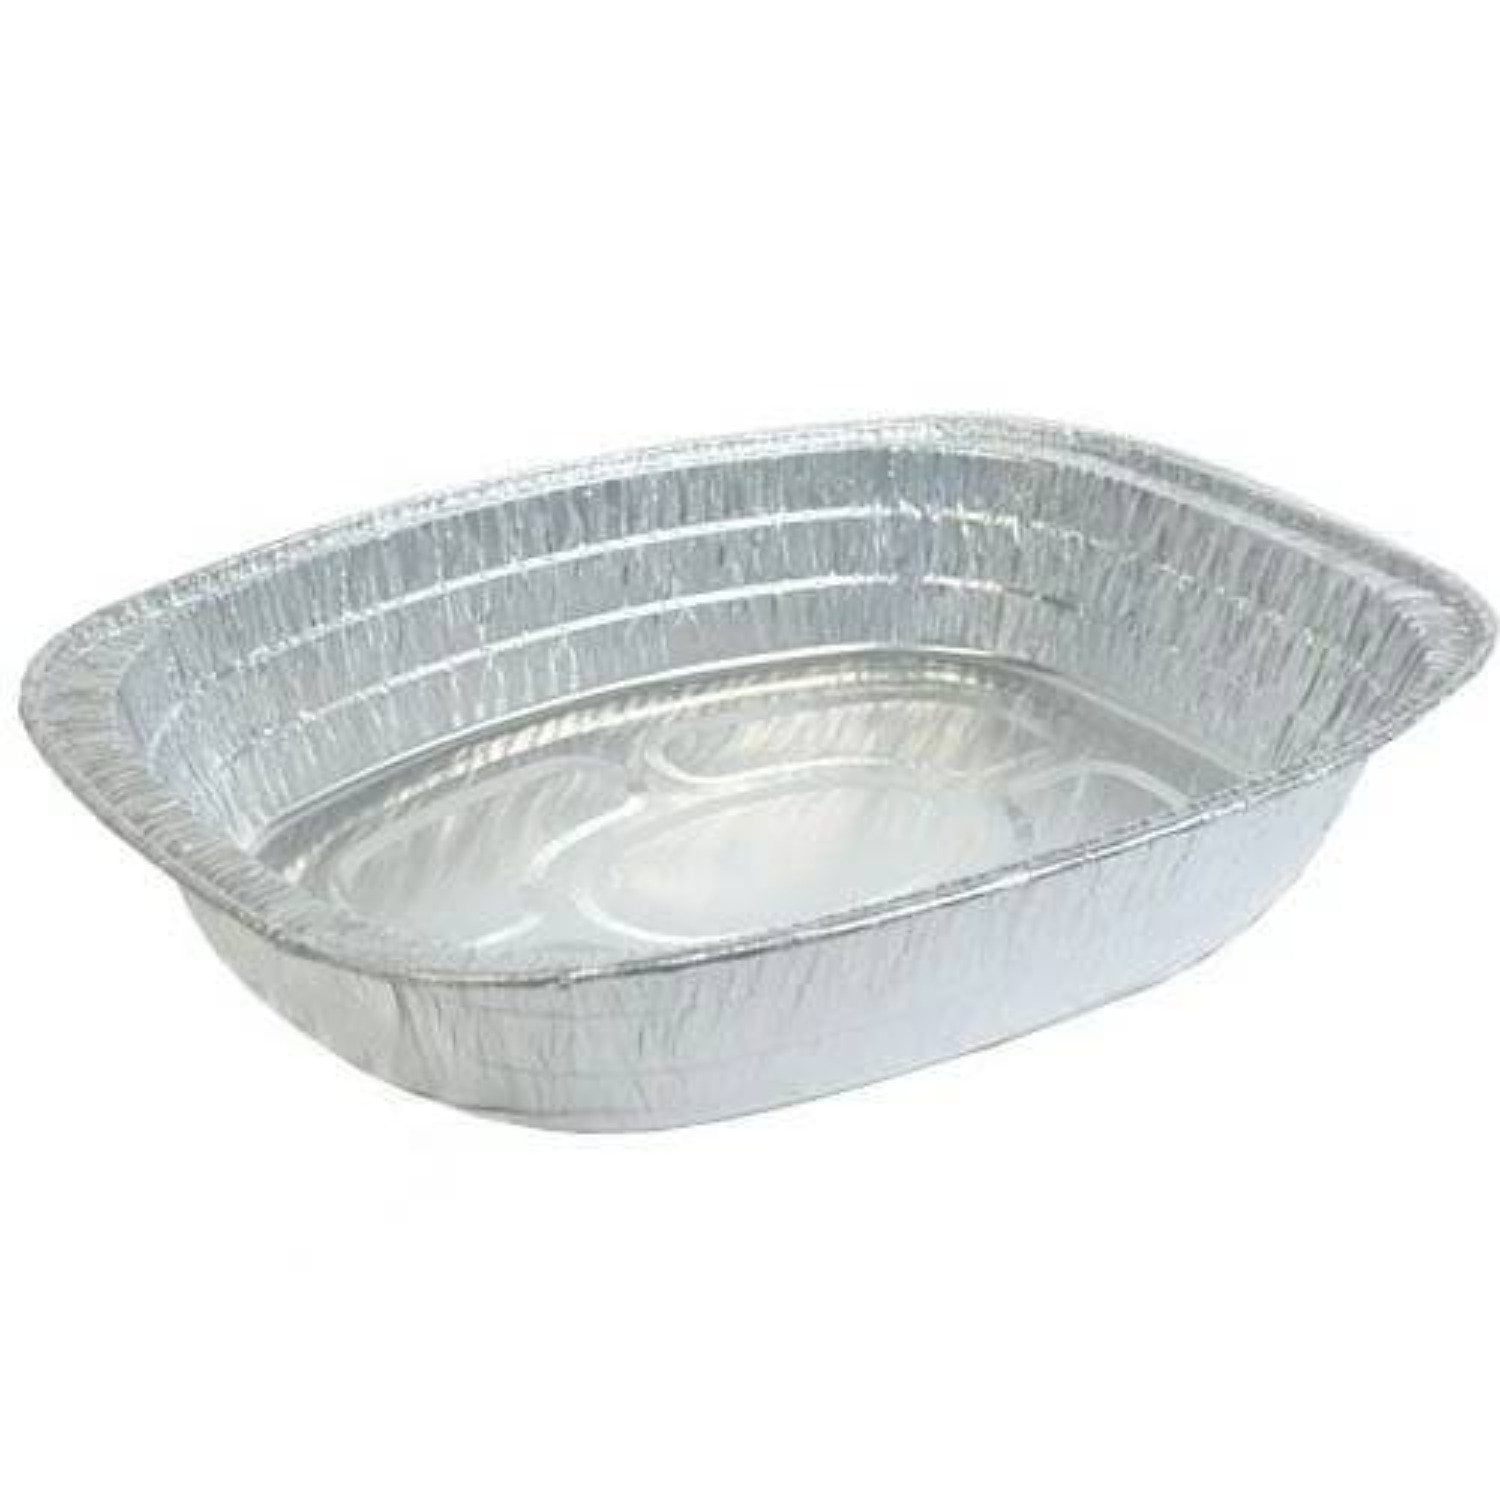 Heavy-Duty Aluminum Foil USA Made Deep Disposable Durable Oval Roaster Pan Roasting Meat Recyclable Baking Brisket 50 Pack Oval Shape for Chicken Turkey Roasting Pans Extra Large 